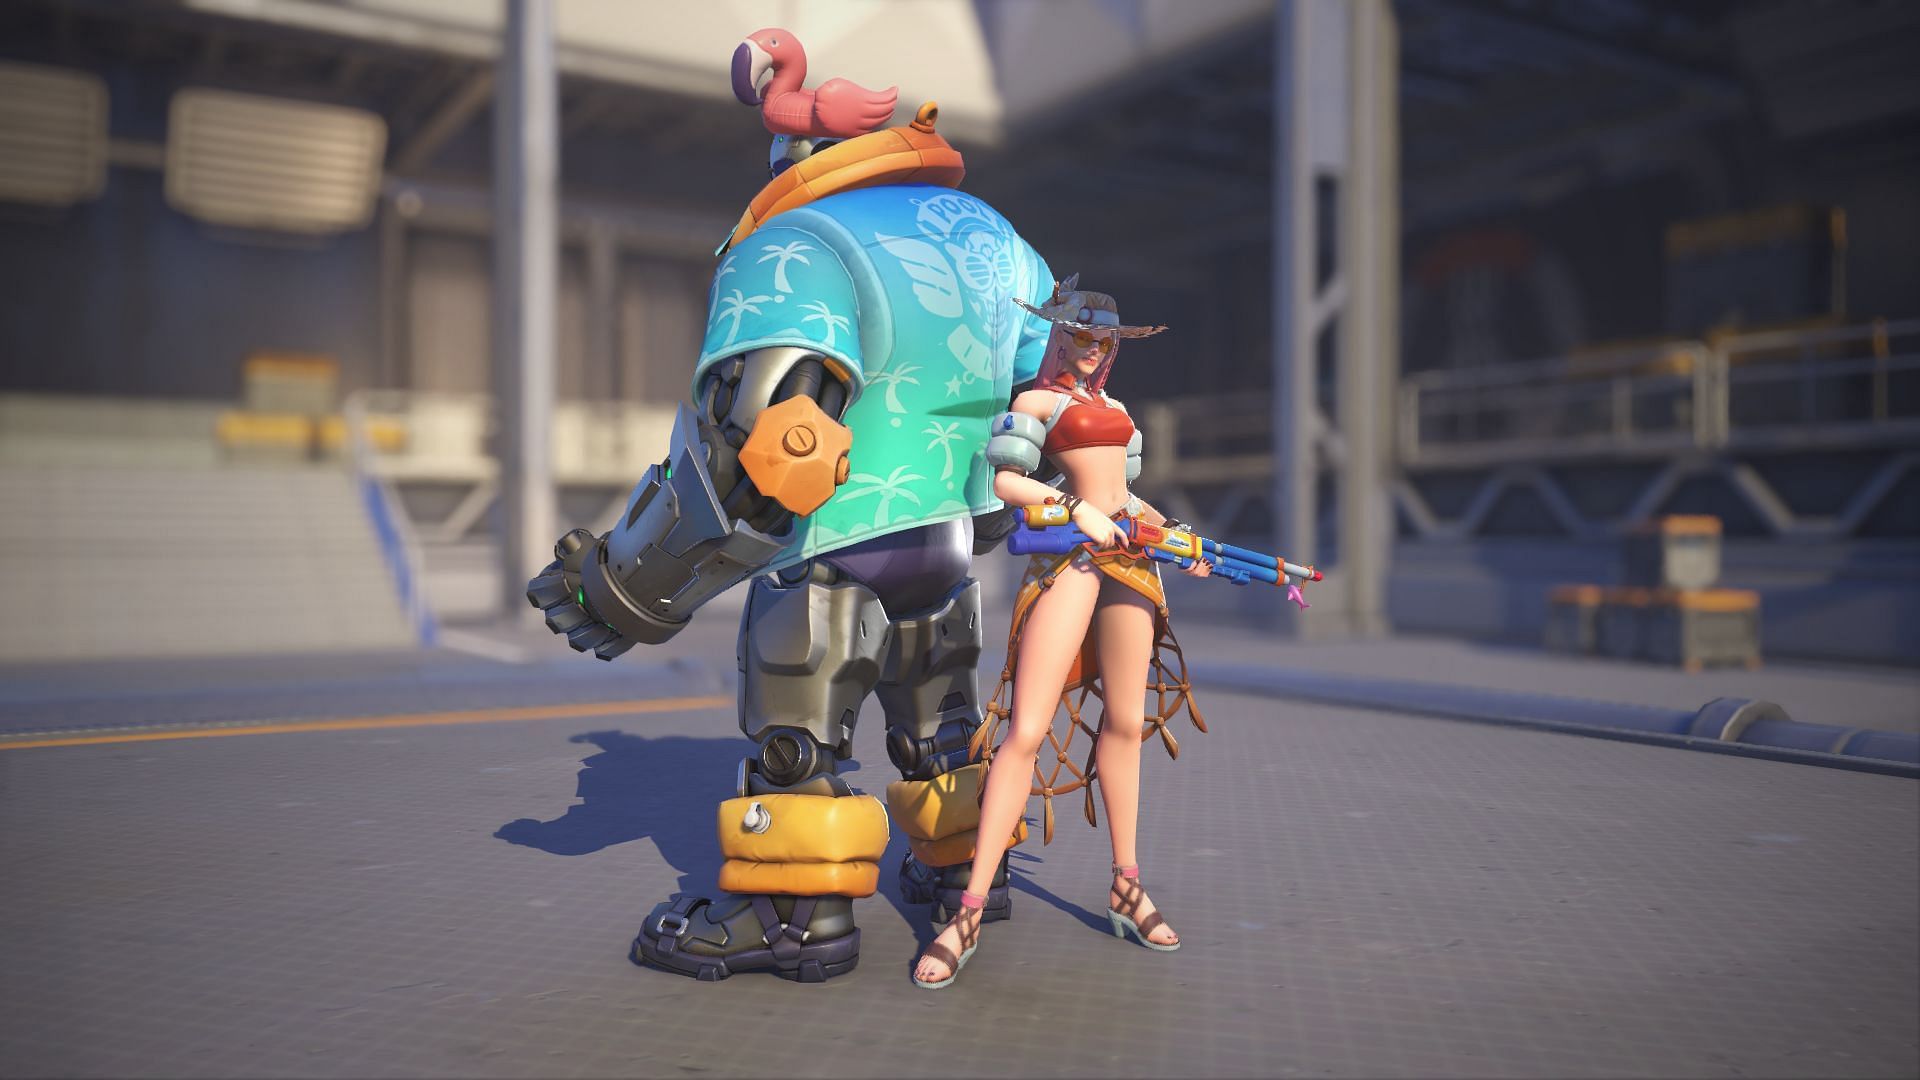 Poolside Ashe as seen in the game (Image via Blizzard Entertainment)